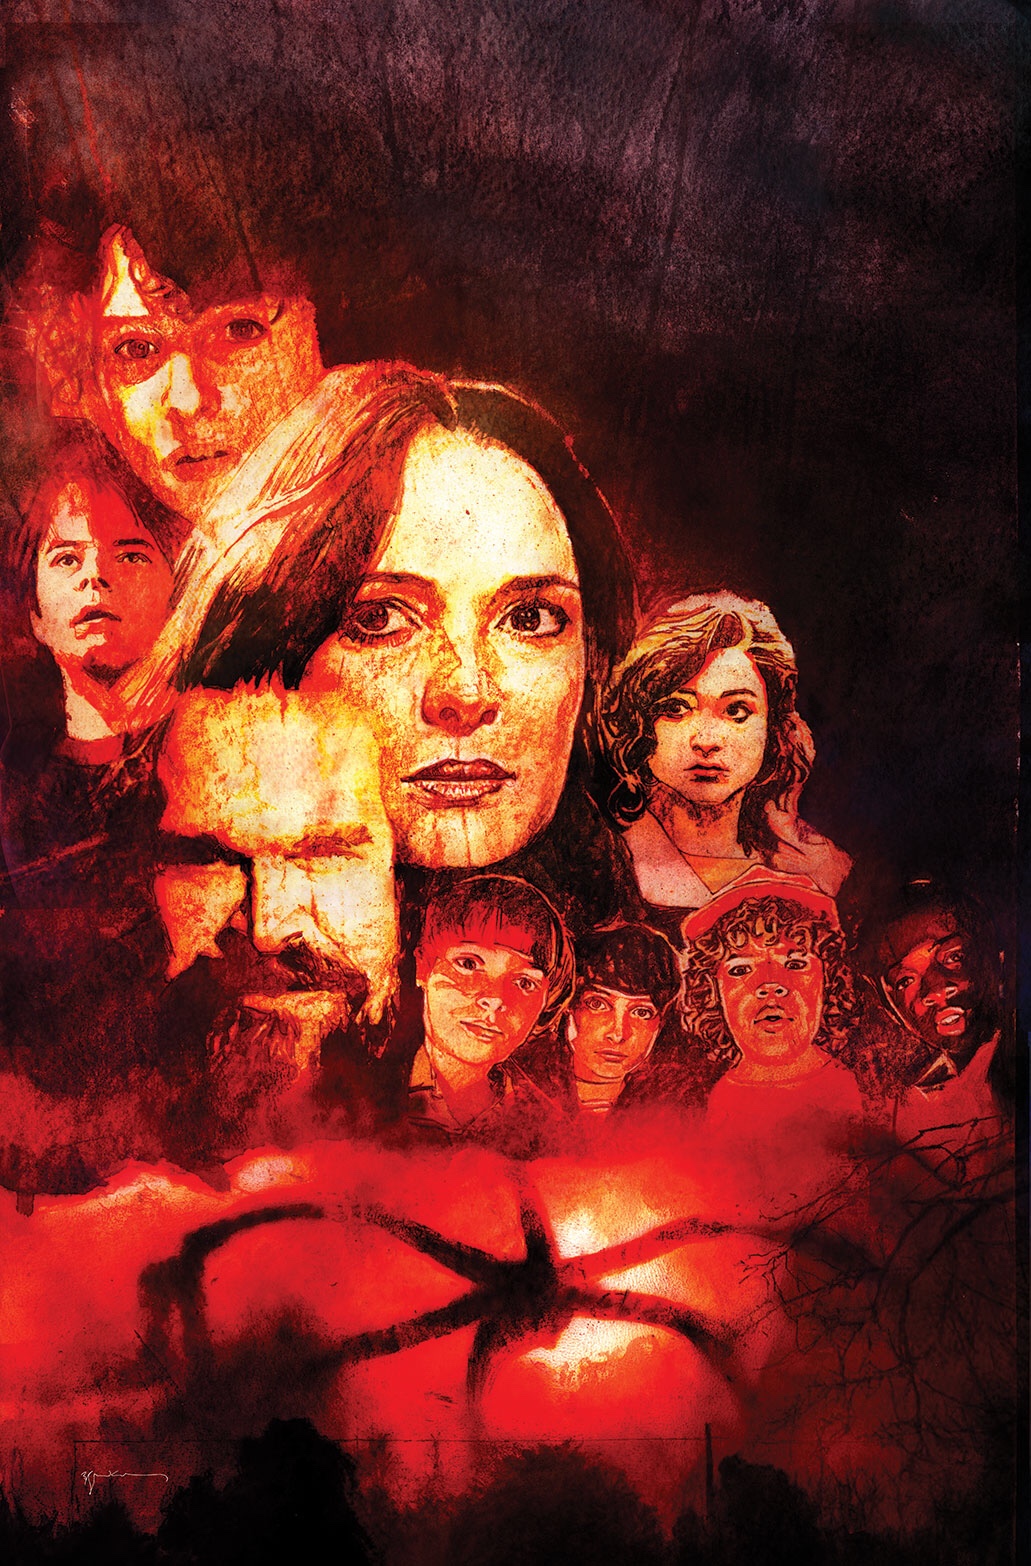 Visions from the Upside Down: A Stranger Things Art Book - art by Bill Sienkiewicz